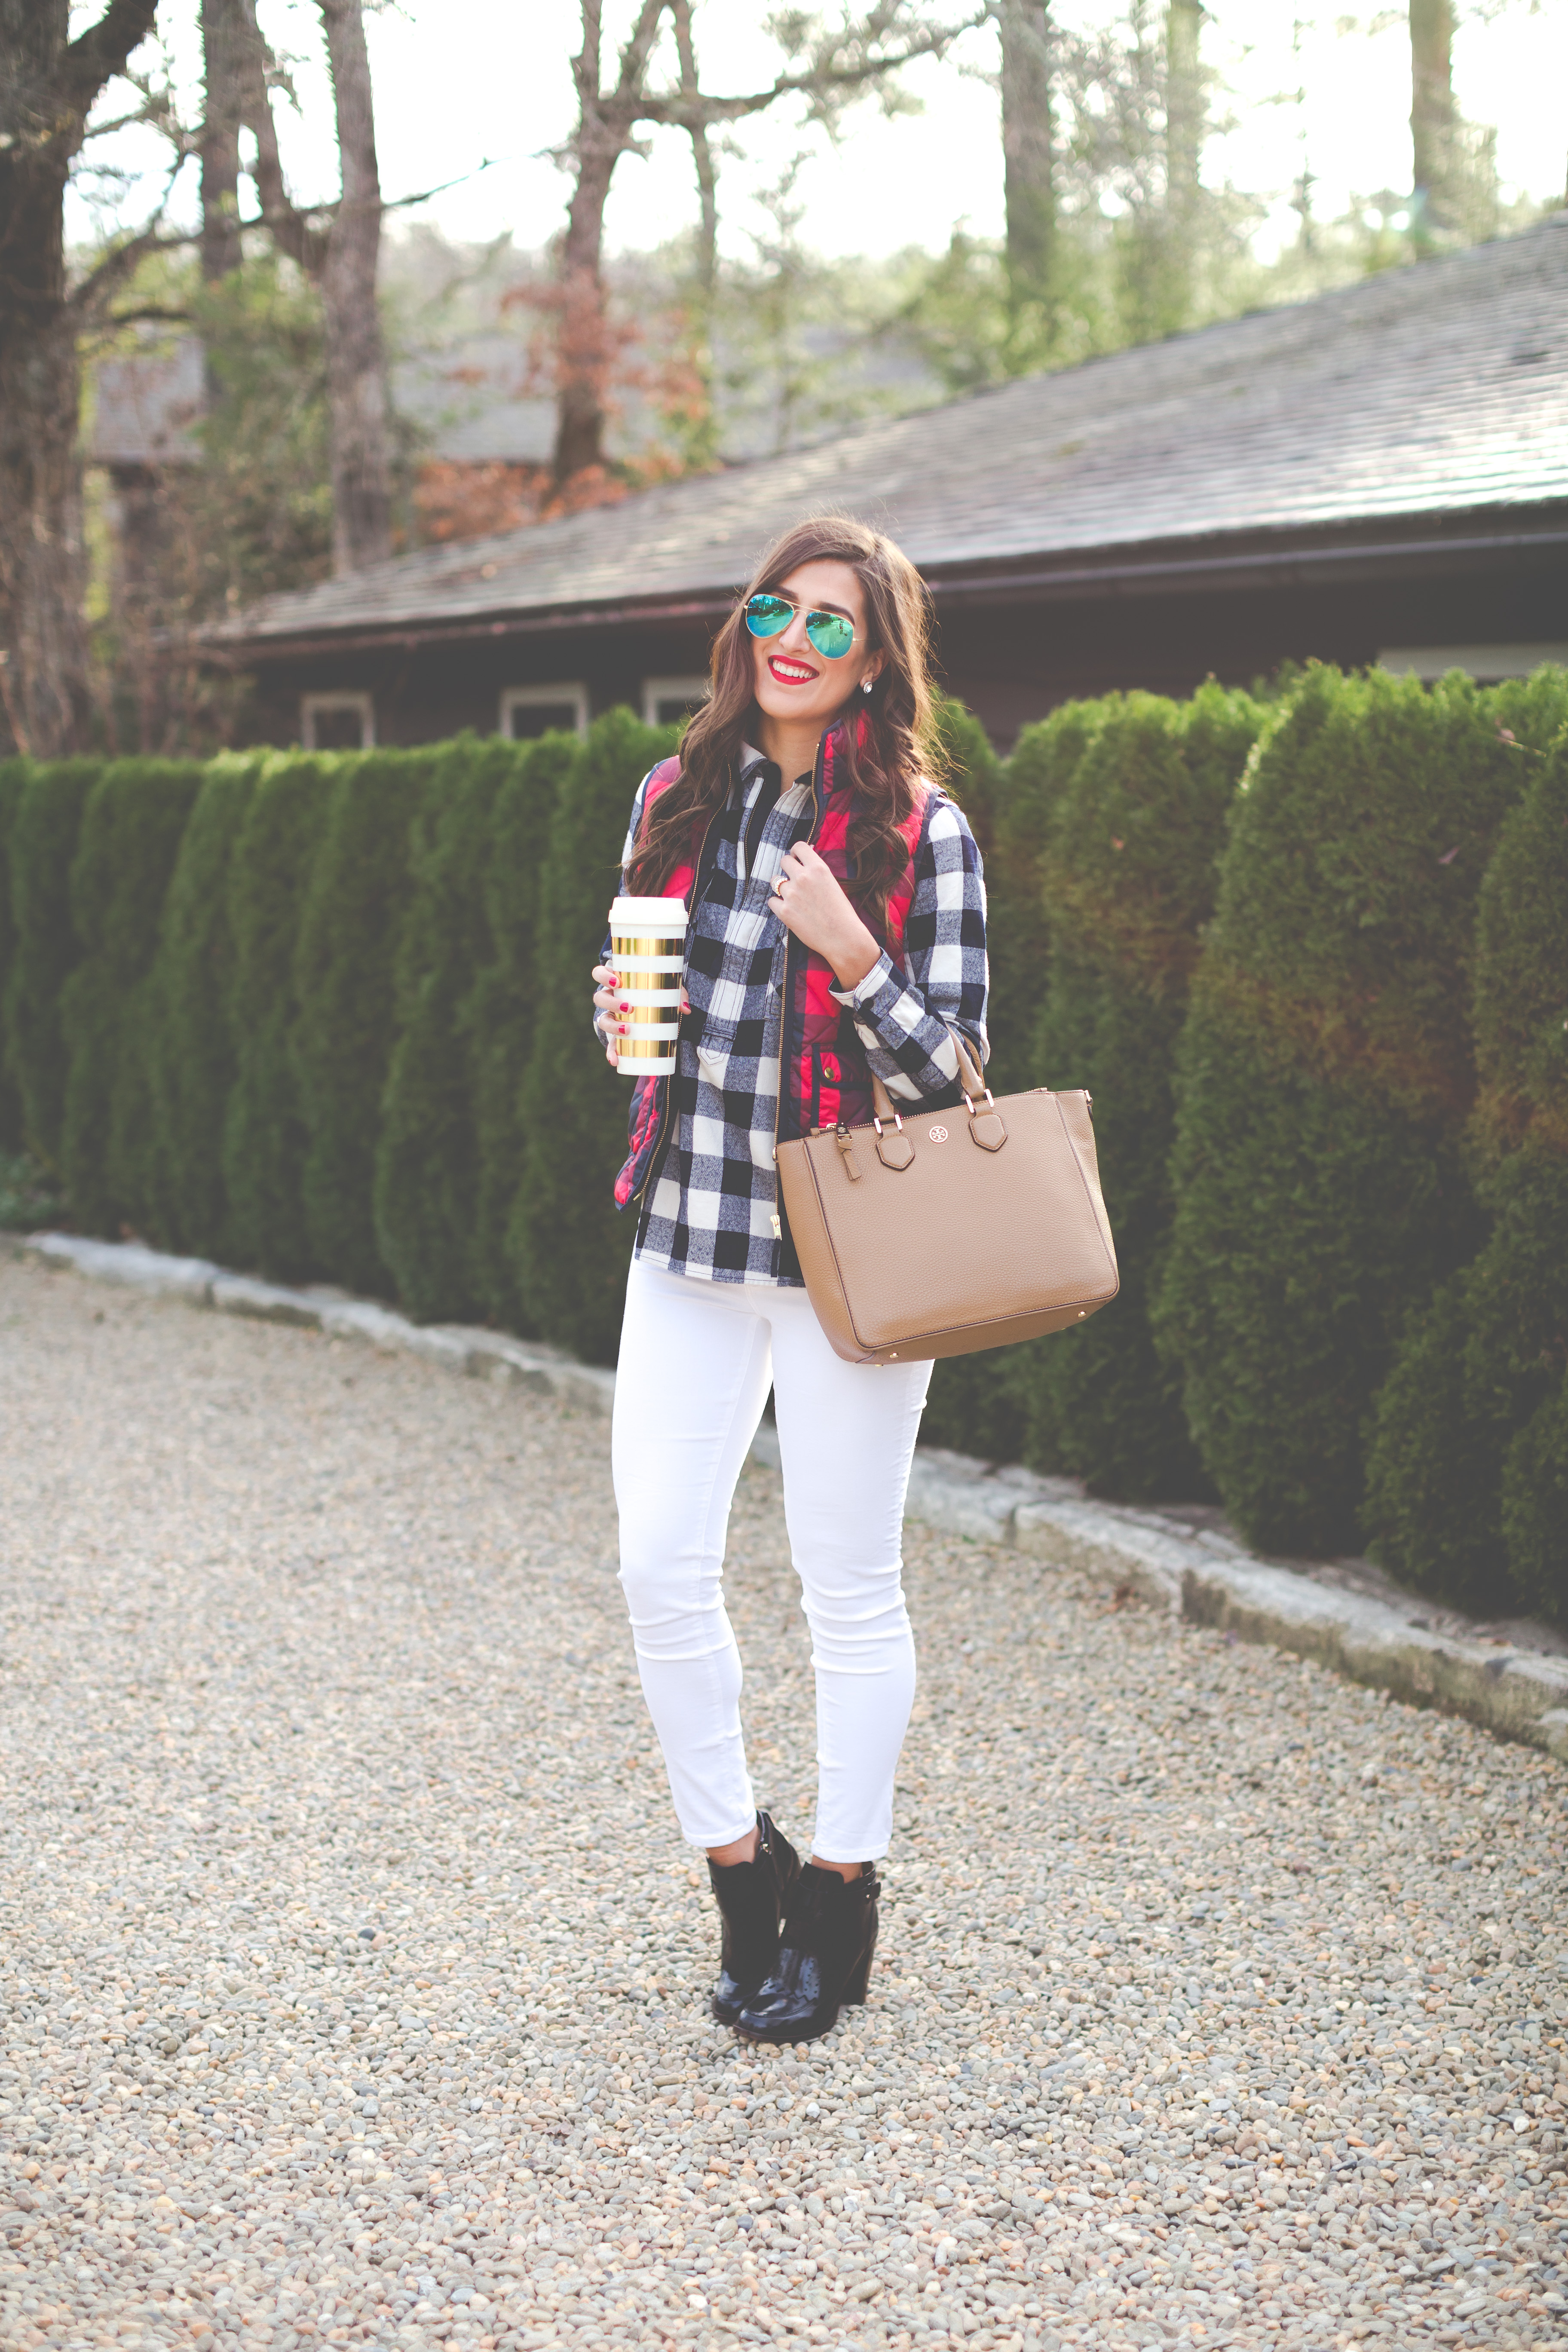 buffalo plaid shirt jacket, buffalo plaid excursion vest, check excursion vest, quilted vest, kate spade thermal mug, holiday look, holiday outfit ideas, preppy holiday outfits // grace wainwright from a southern drawl